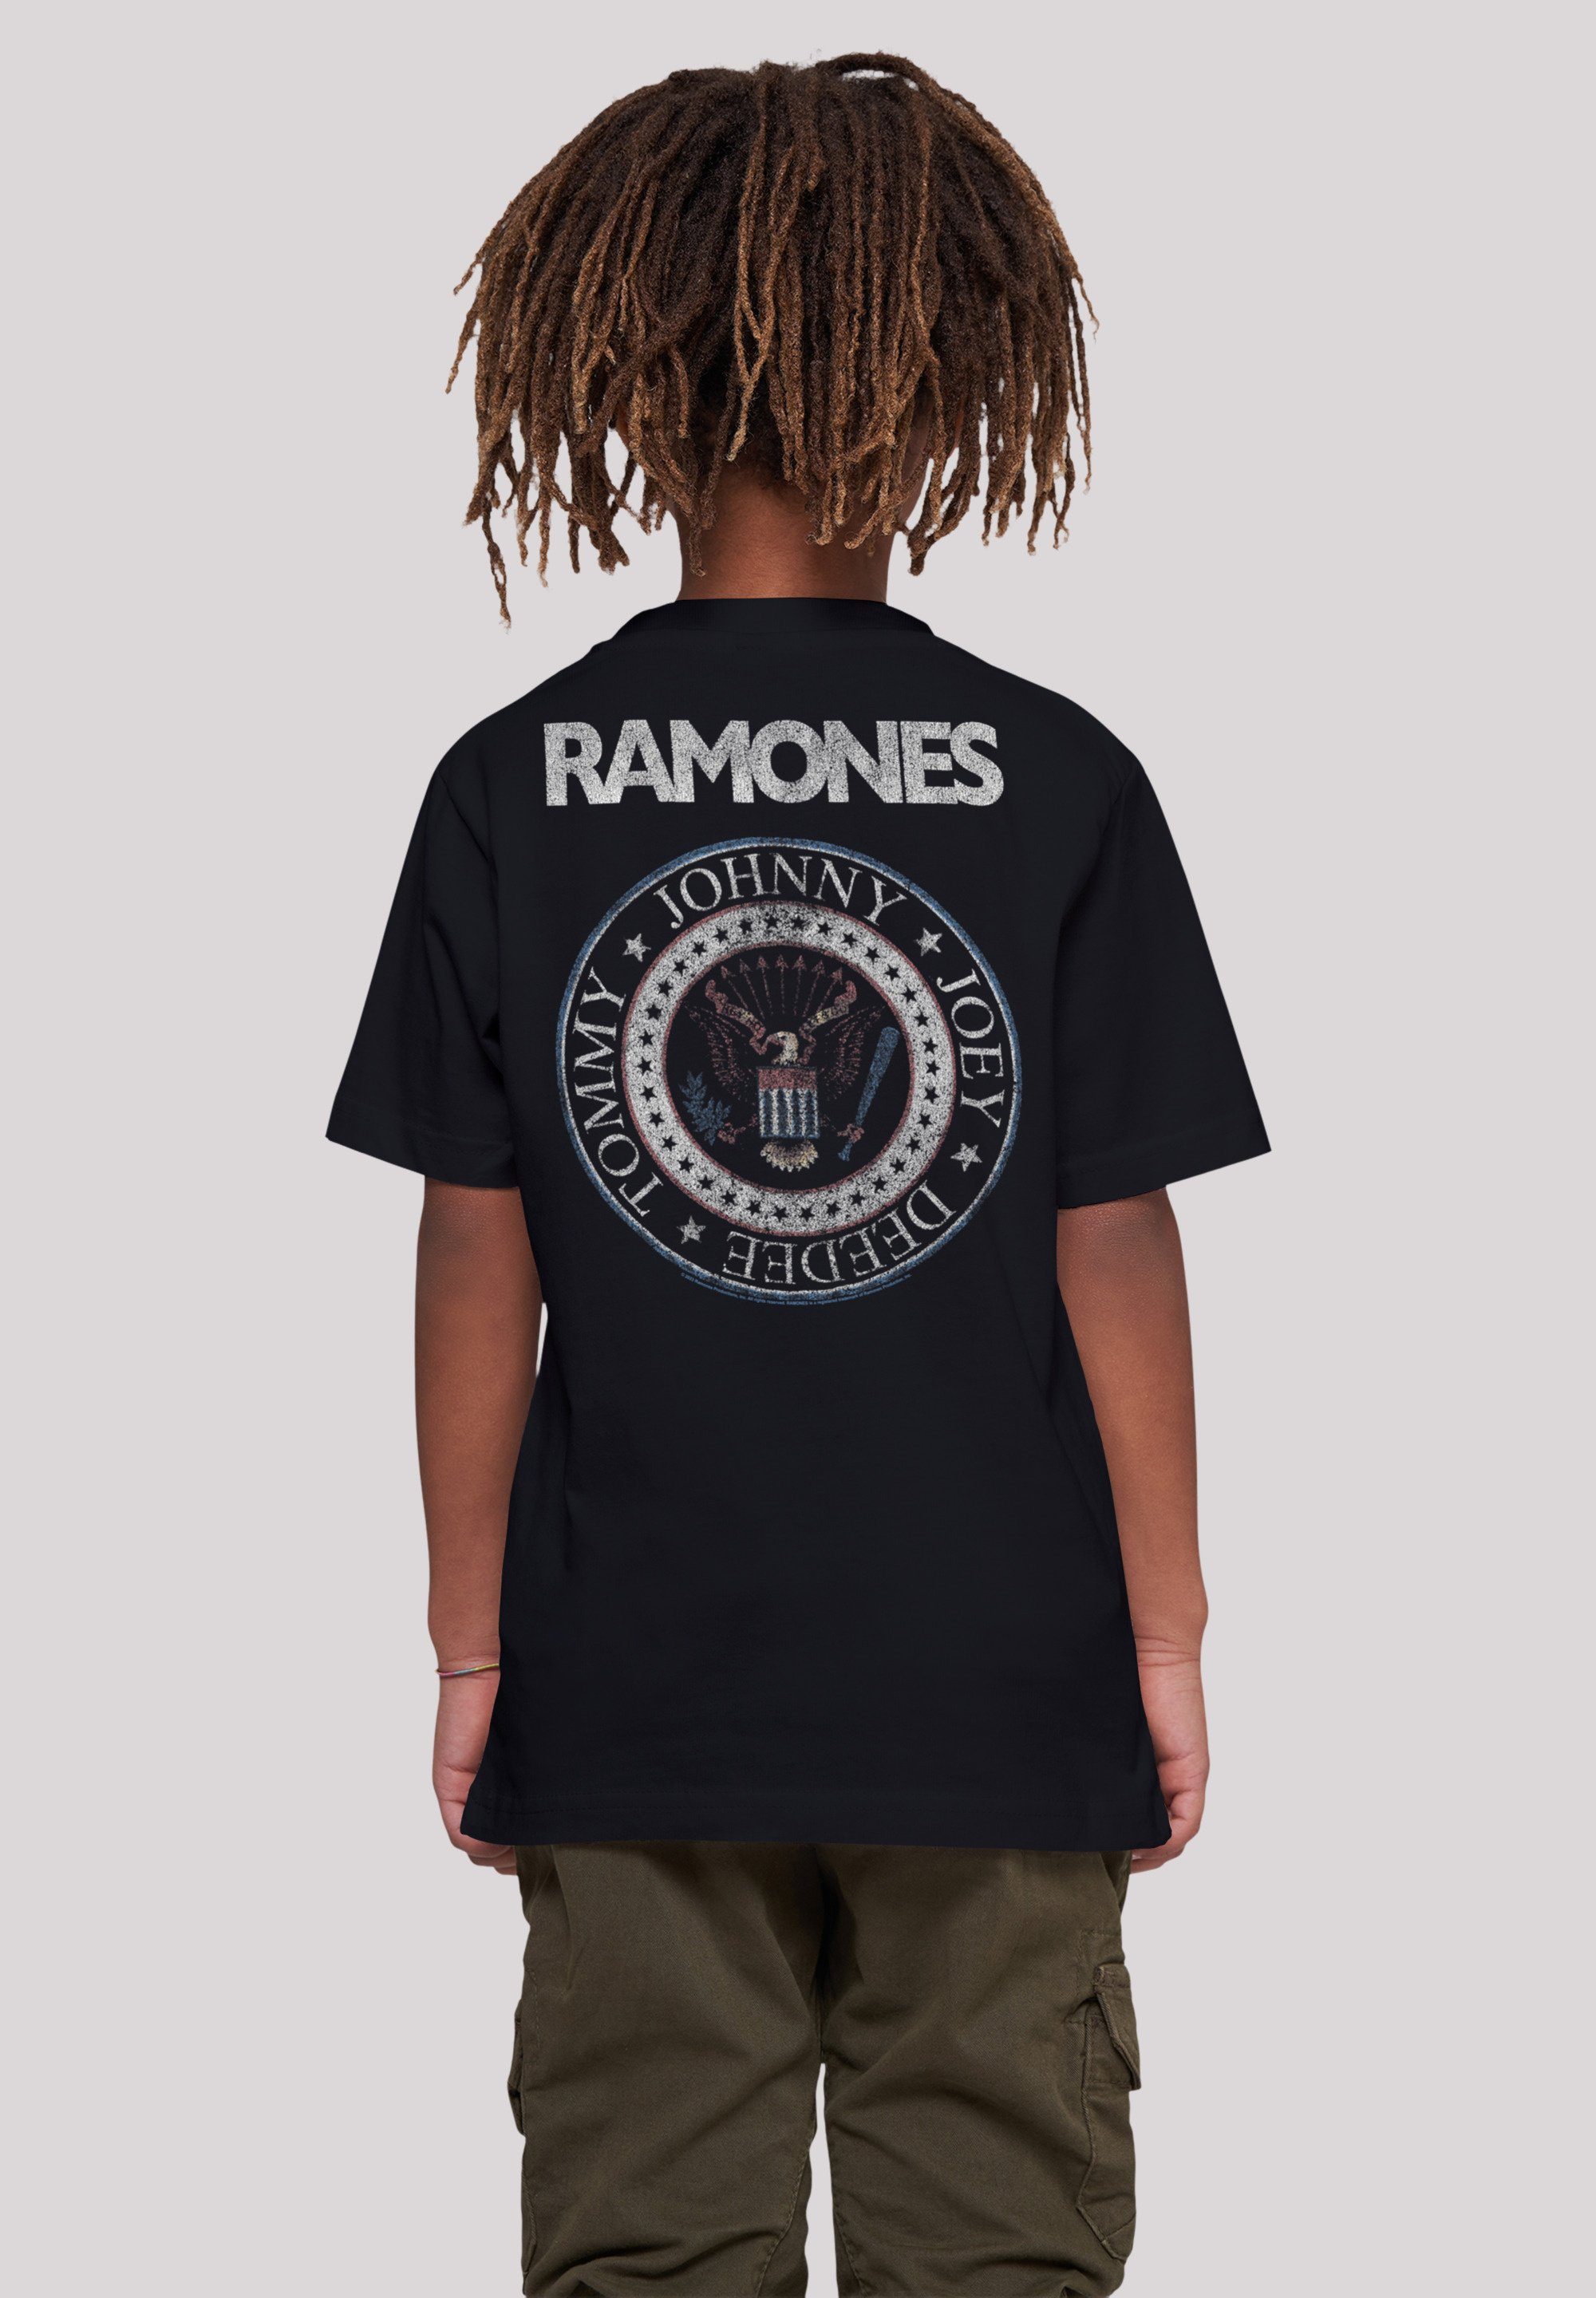 Red Rock Seal Musik Band, And Qualität, F4NT4STIC Band Ramones Rock-Musik T-Shirt White Premium